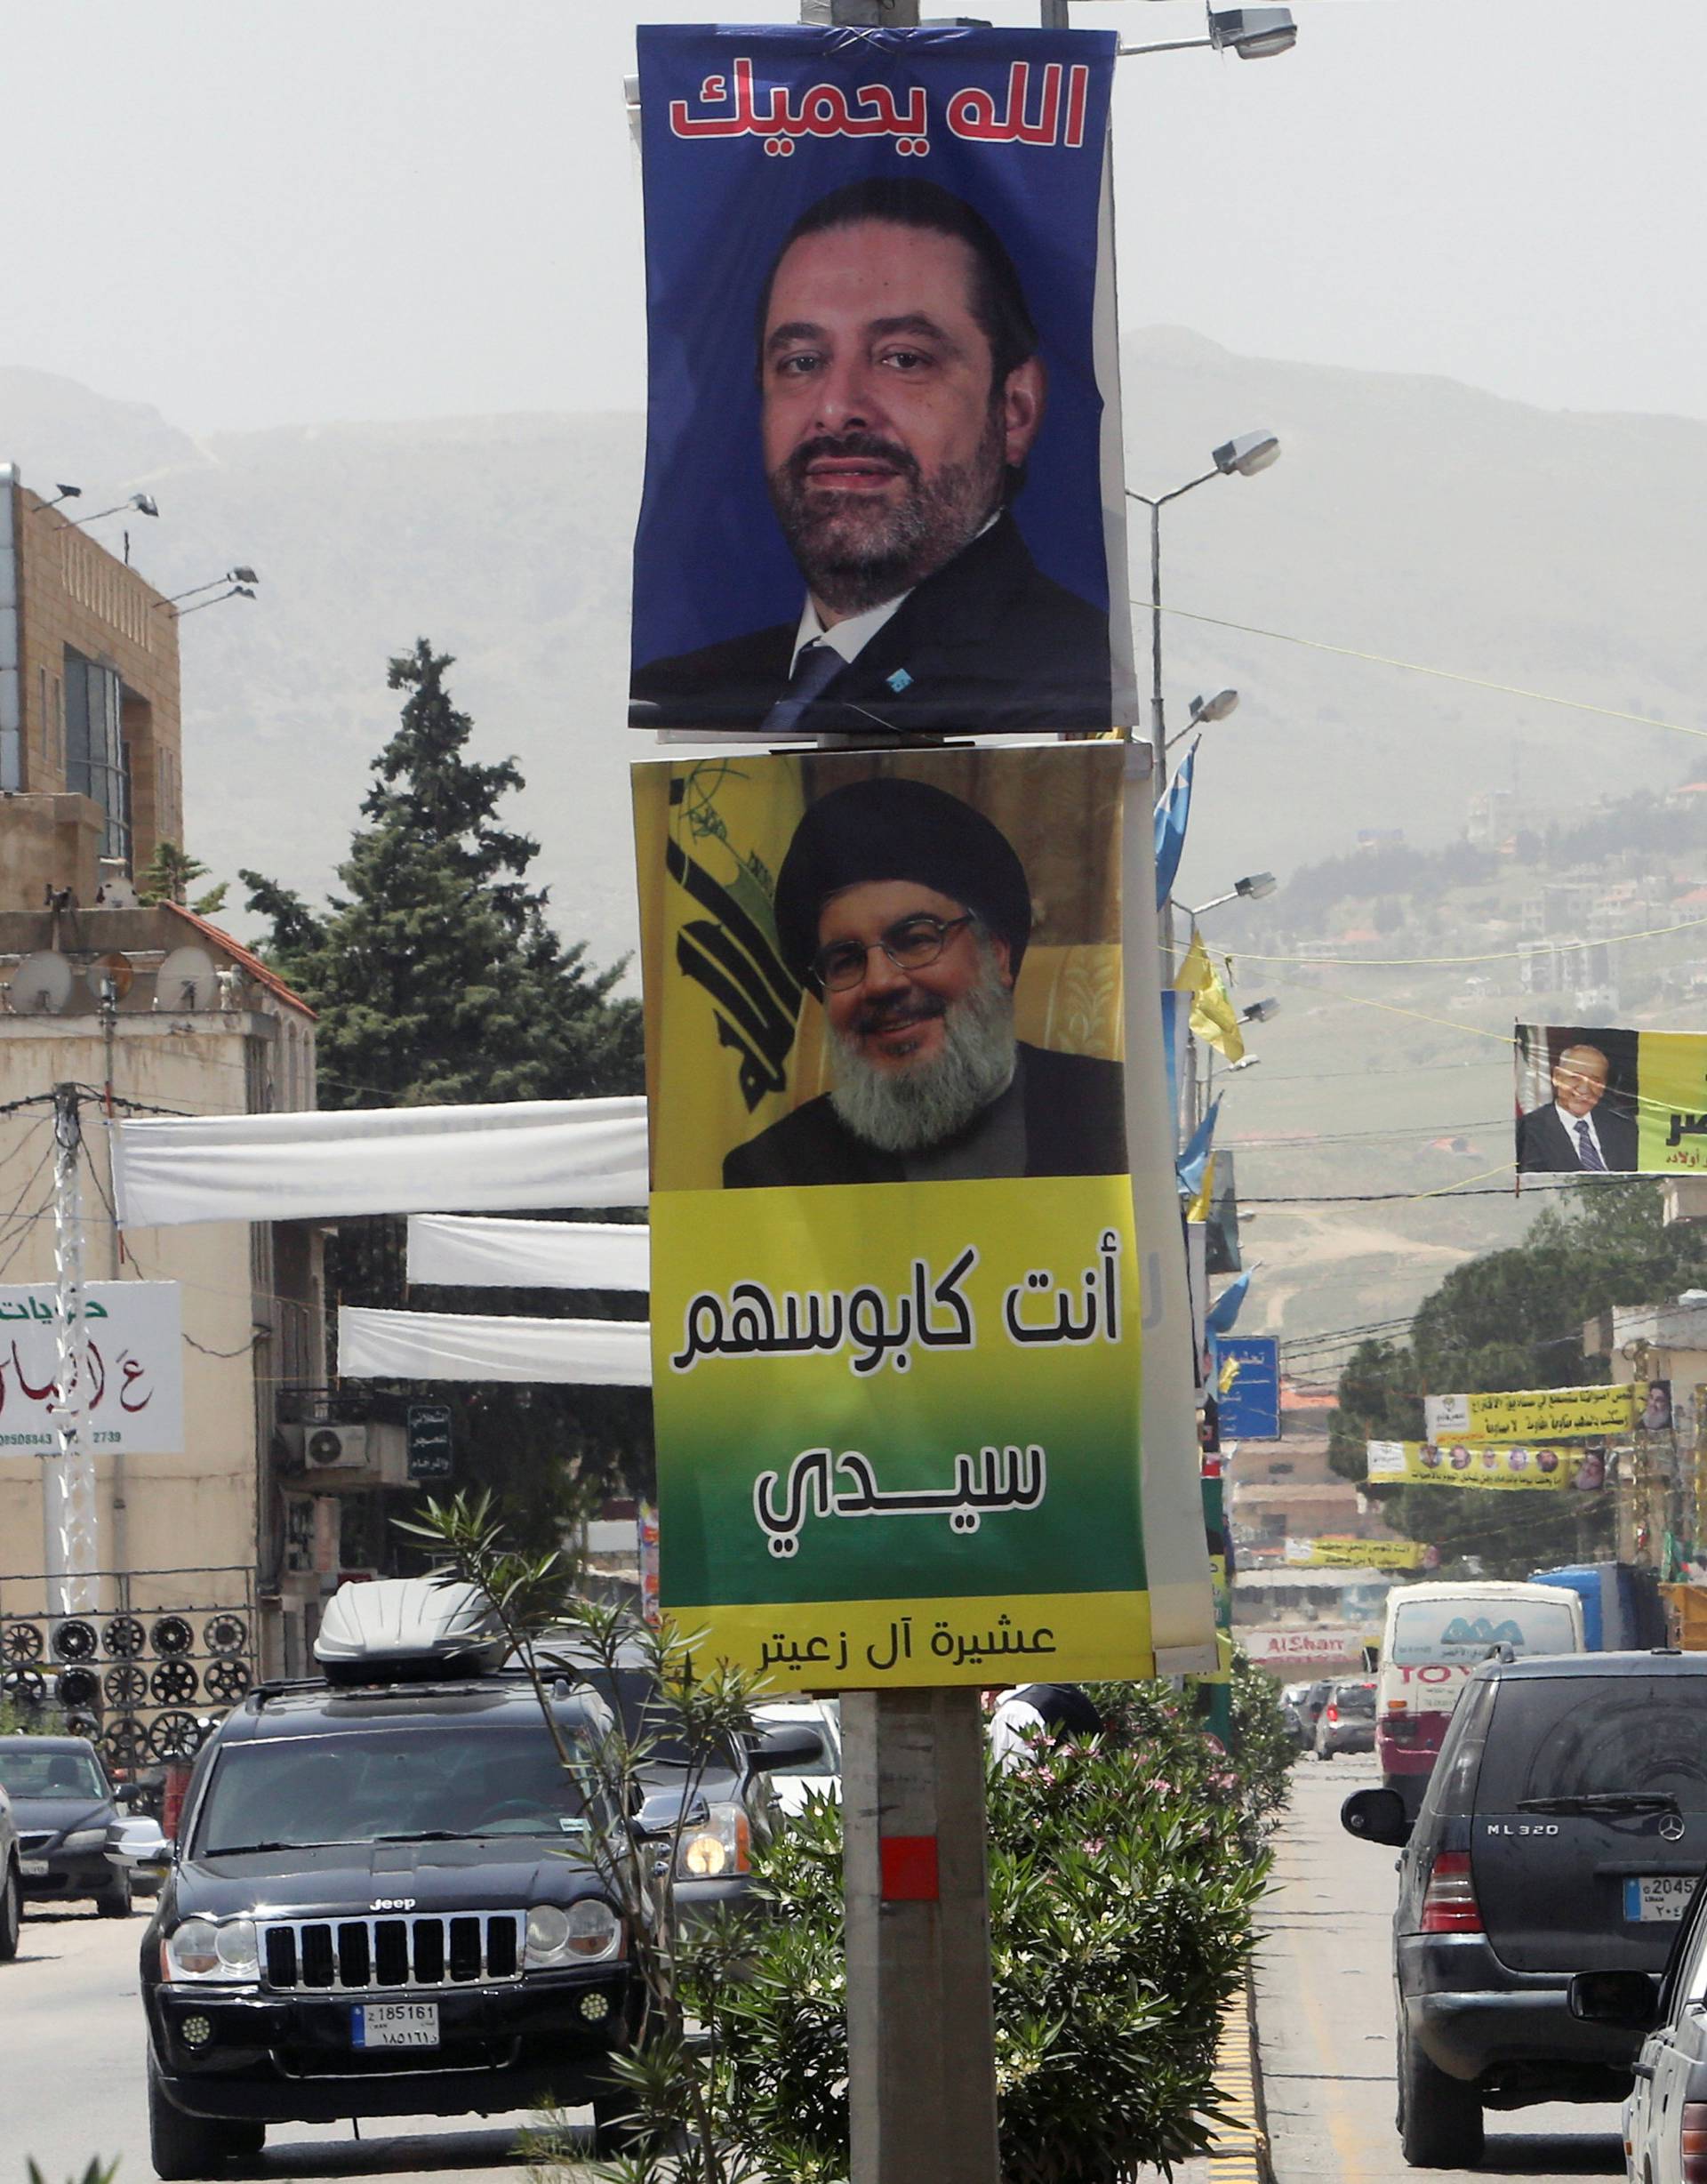 Posters of Lebanese Prime Minister and candidate for parliamentary election Saad al-Hariri and Lebanon's Hezbollah leader Sayyed Hassan Nasrallah hang along a street in Zahle